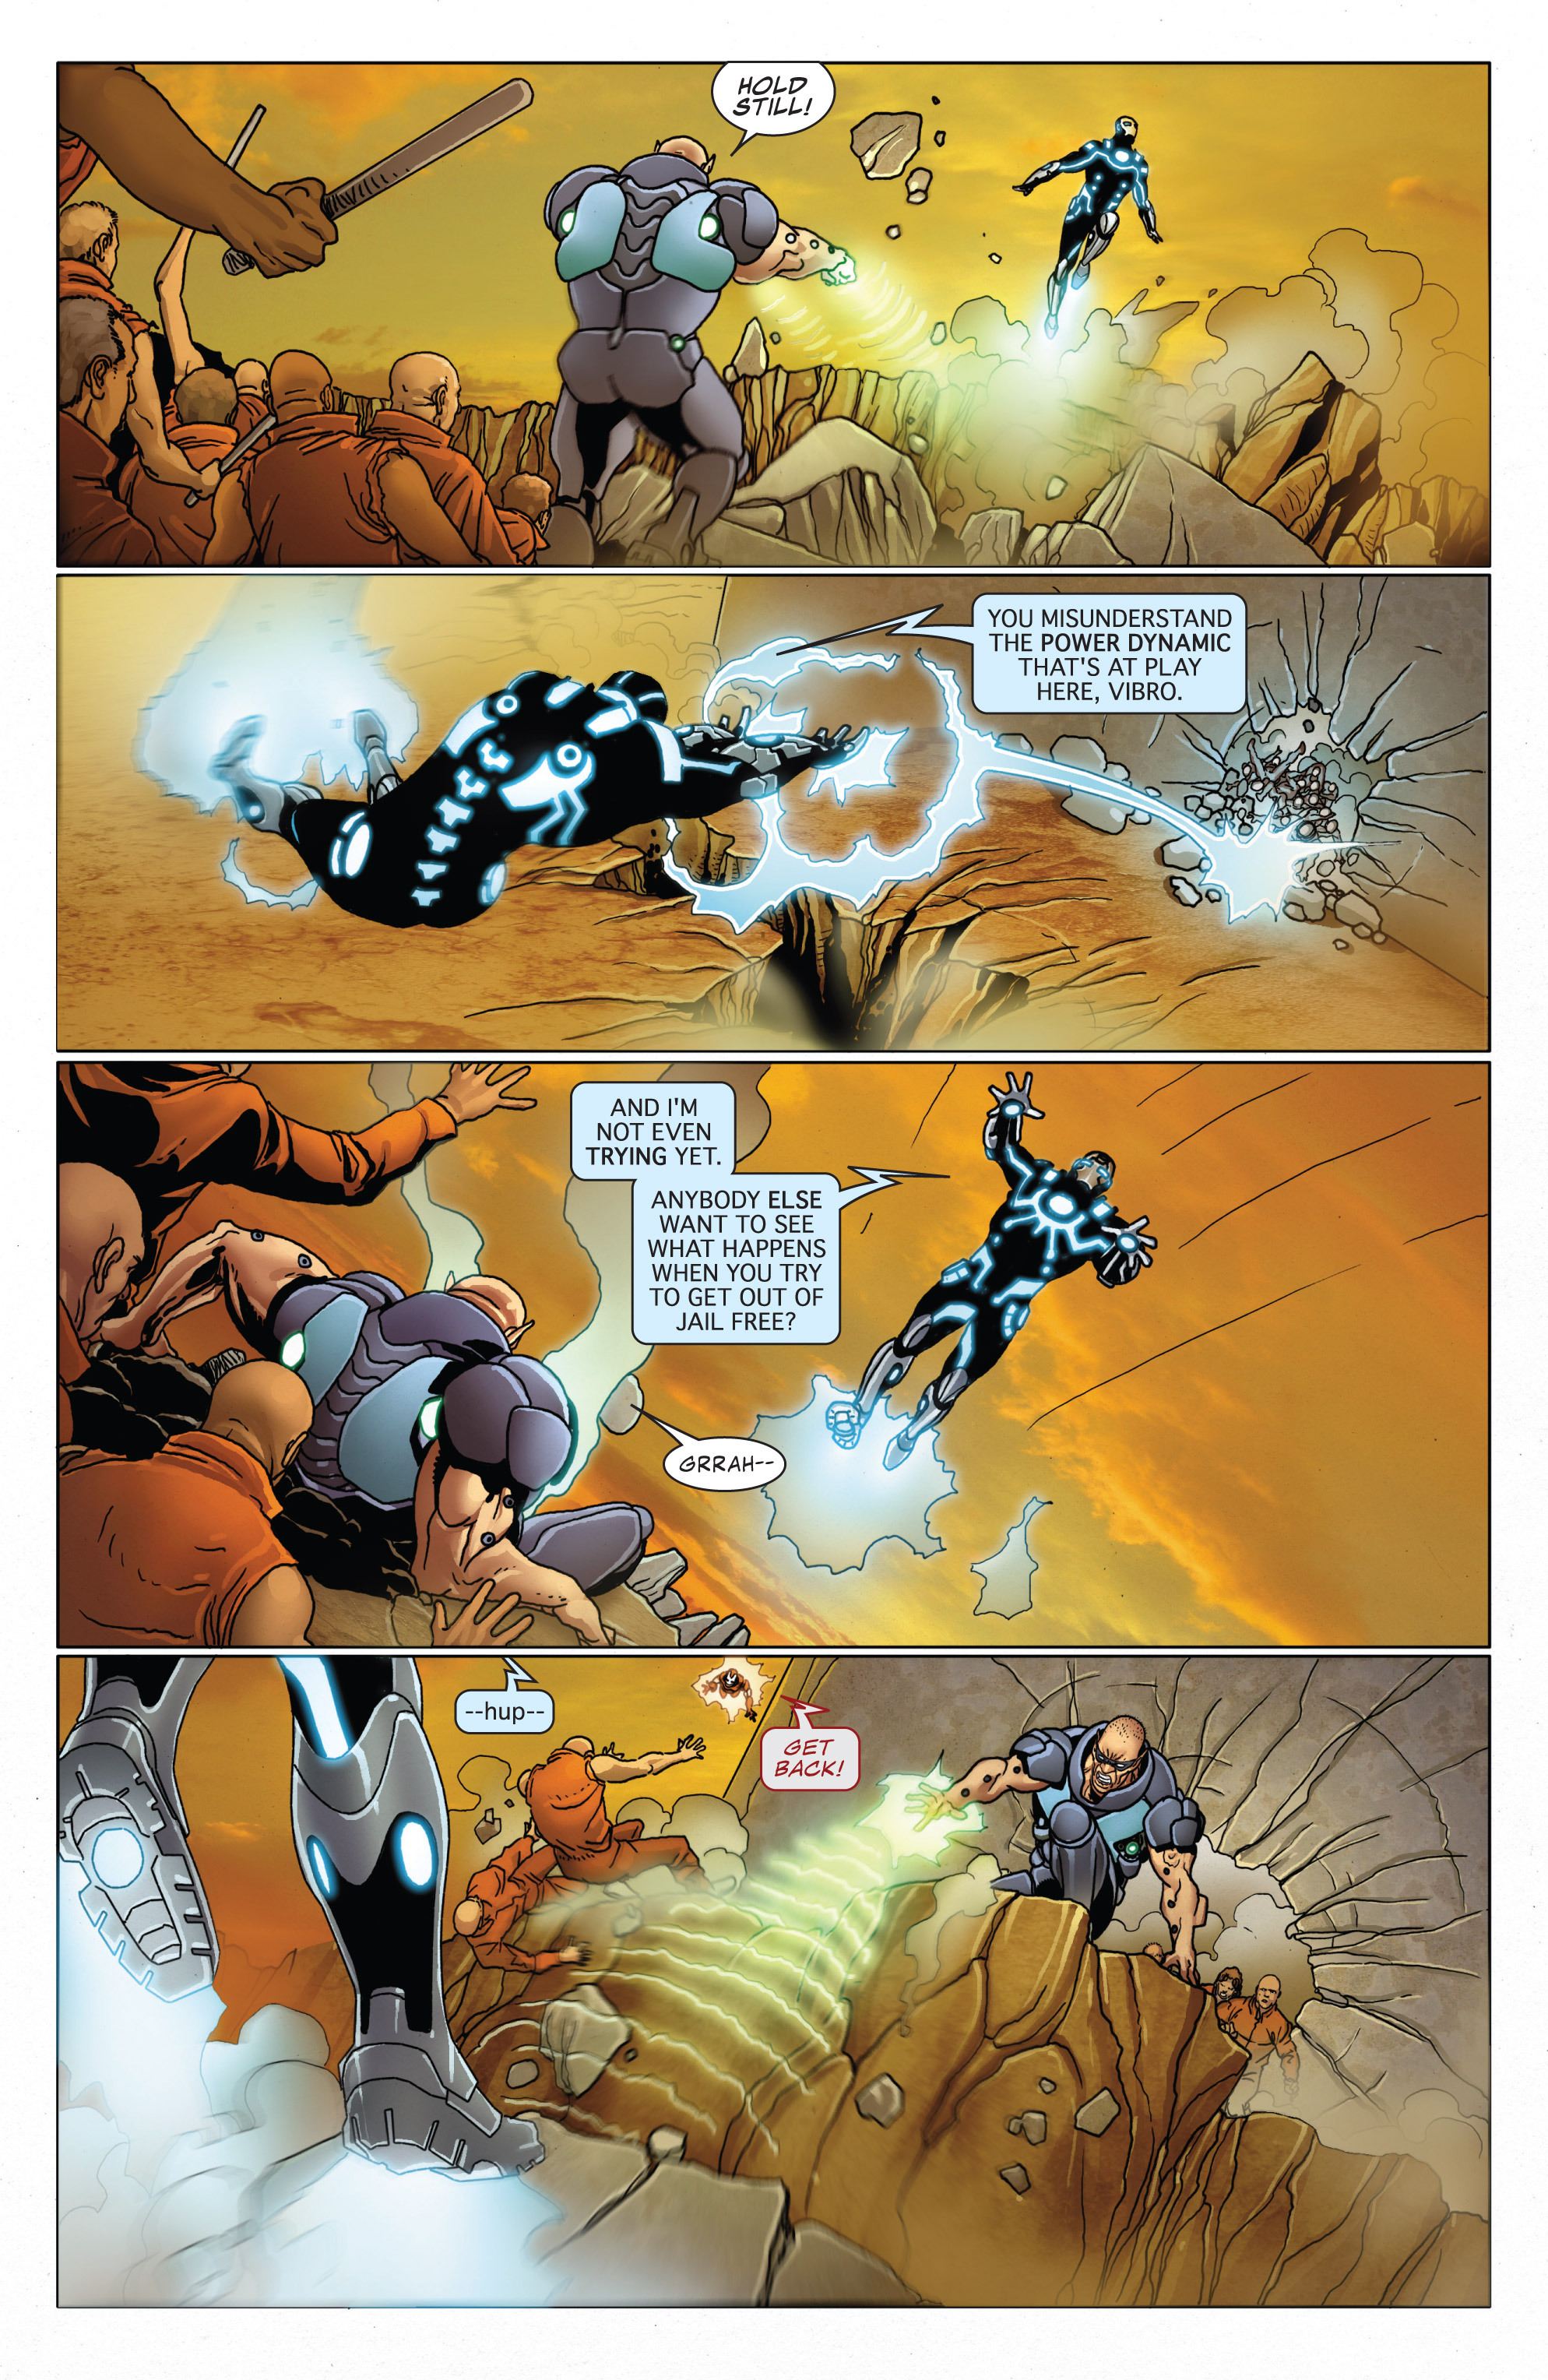 Invincible Iron Man (2008) 521 Page 7